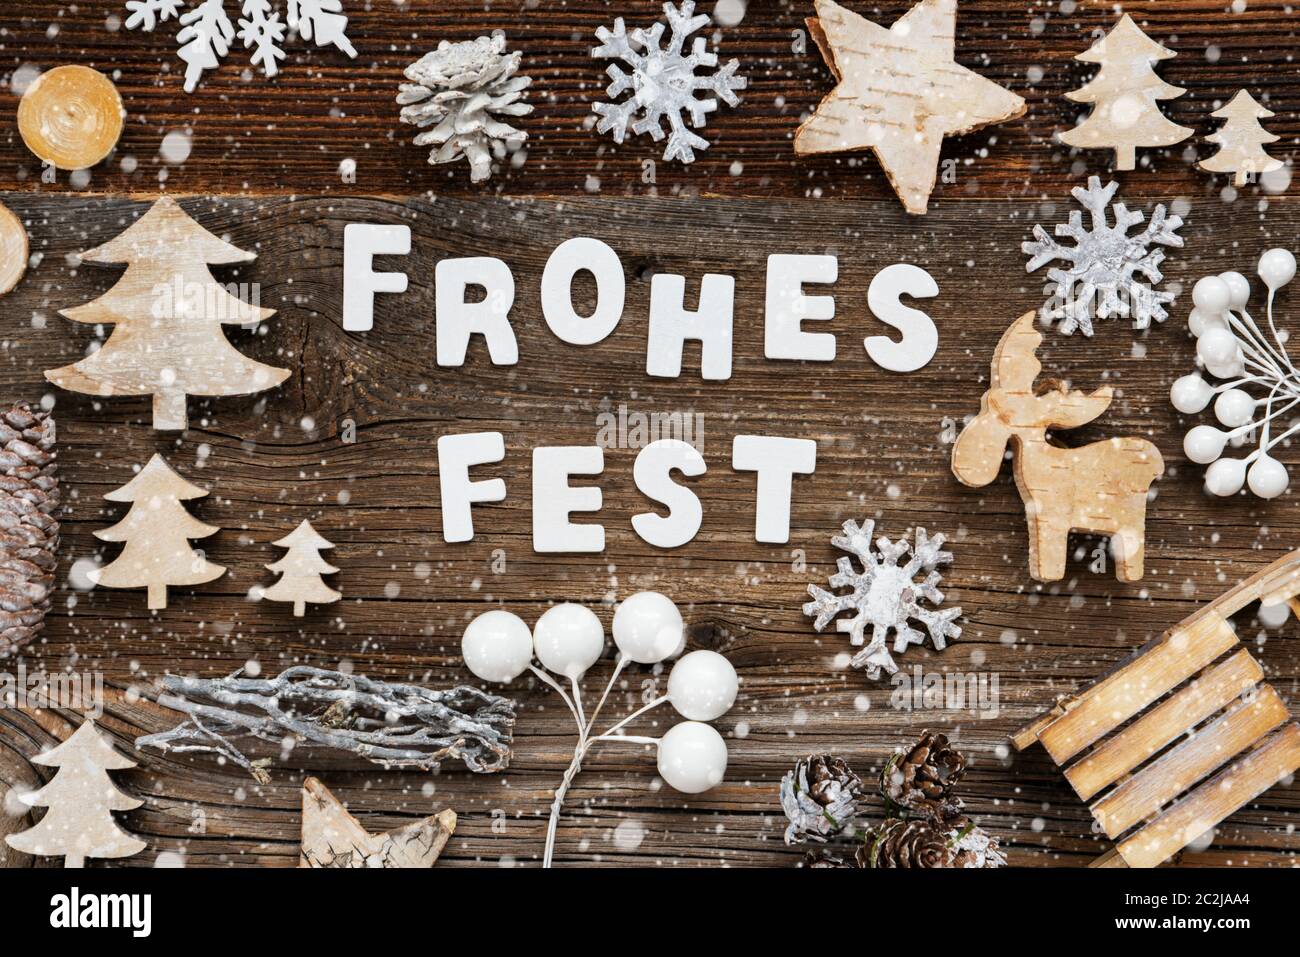 White Letters Building The Word Frohes Fest Means Merry Christmas. Wooden Christmas Decoration Like Tree, Sled And Star. Brown Wooden Background With Stock Photo